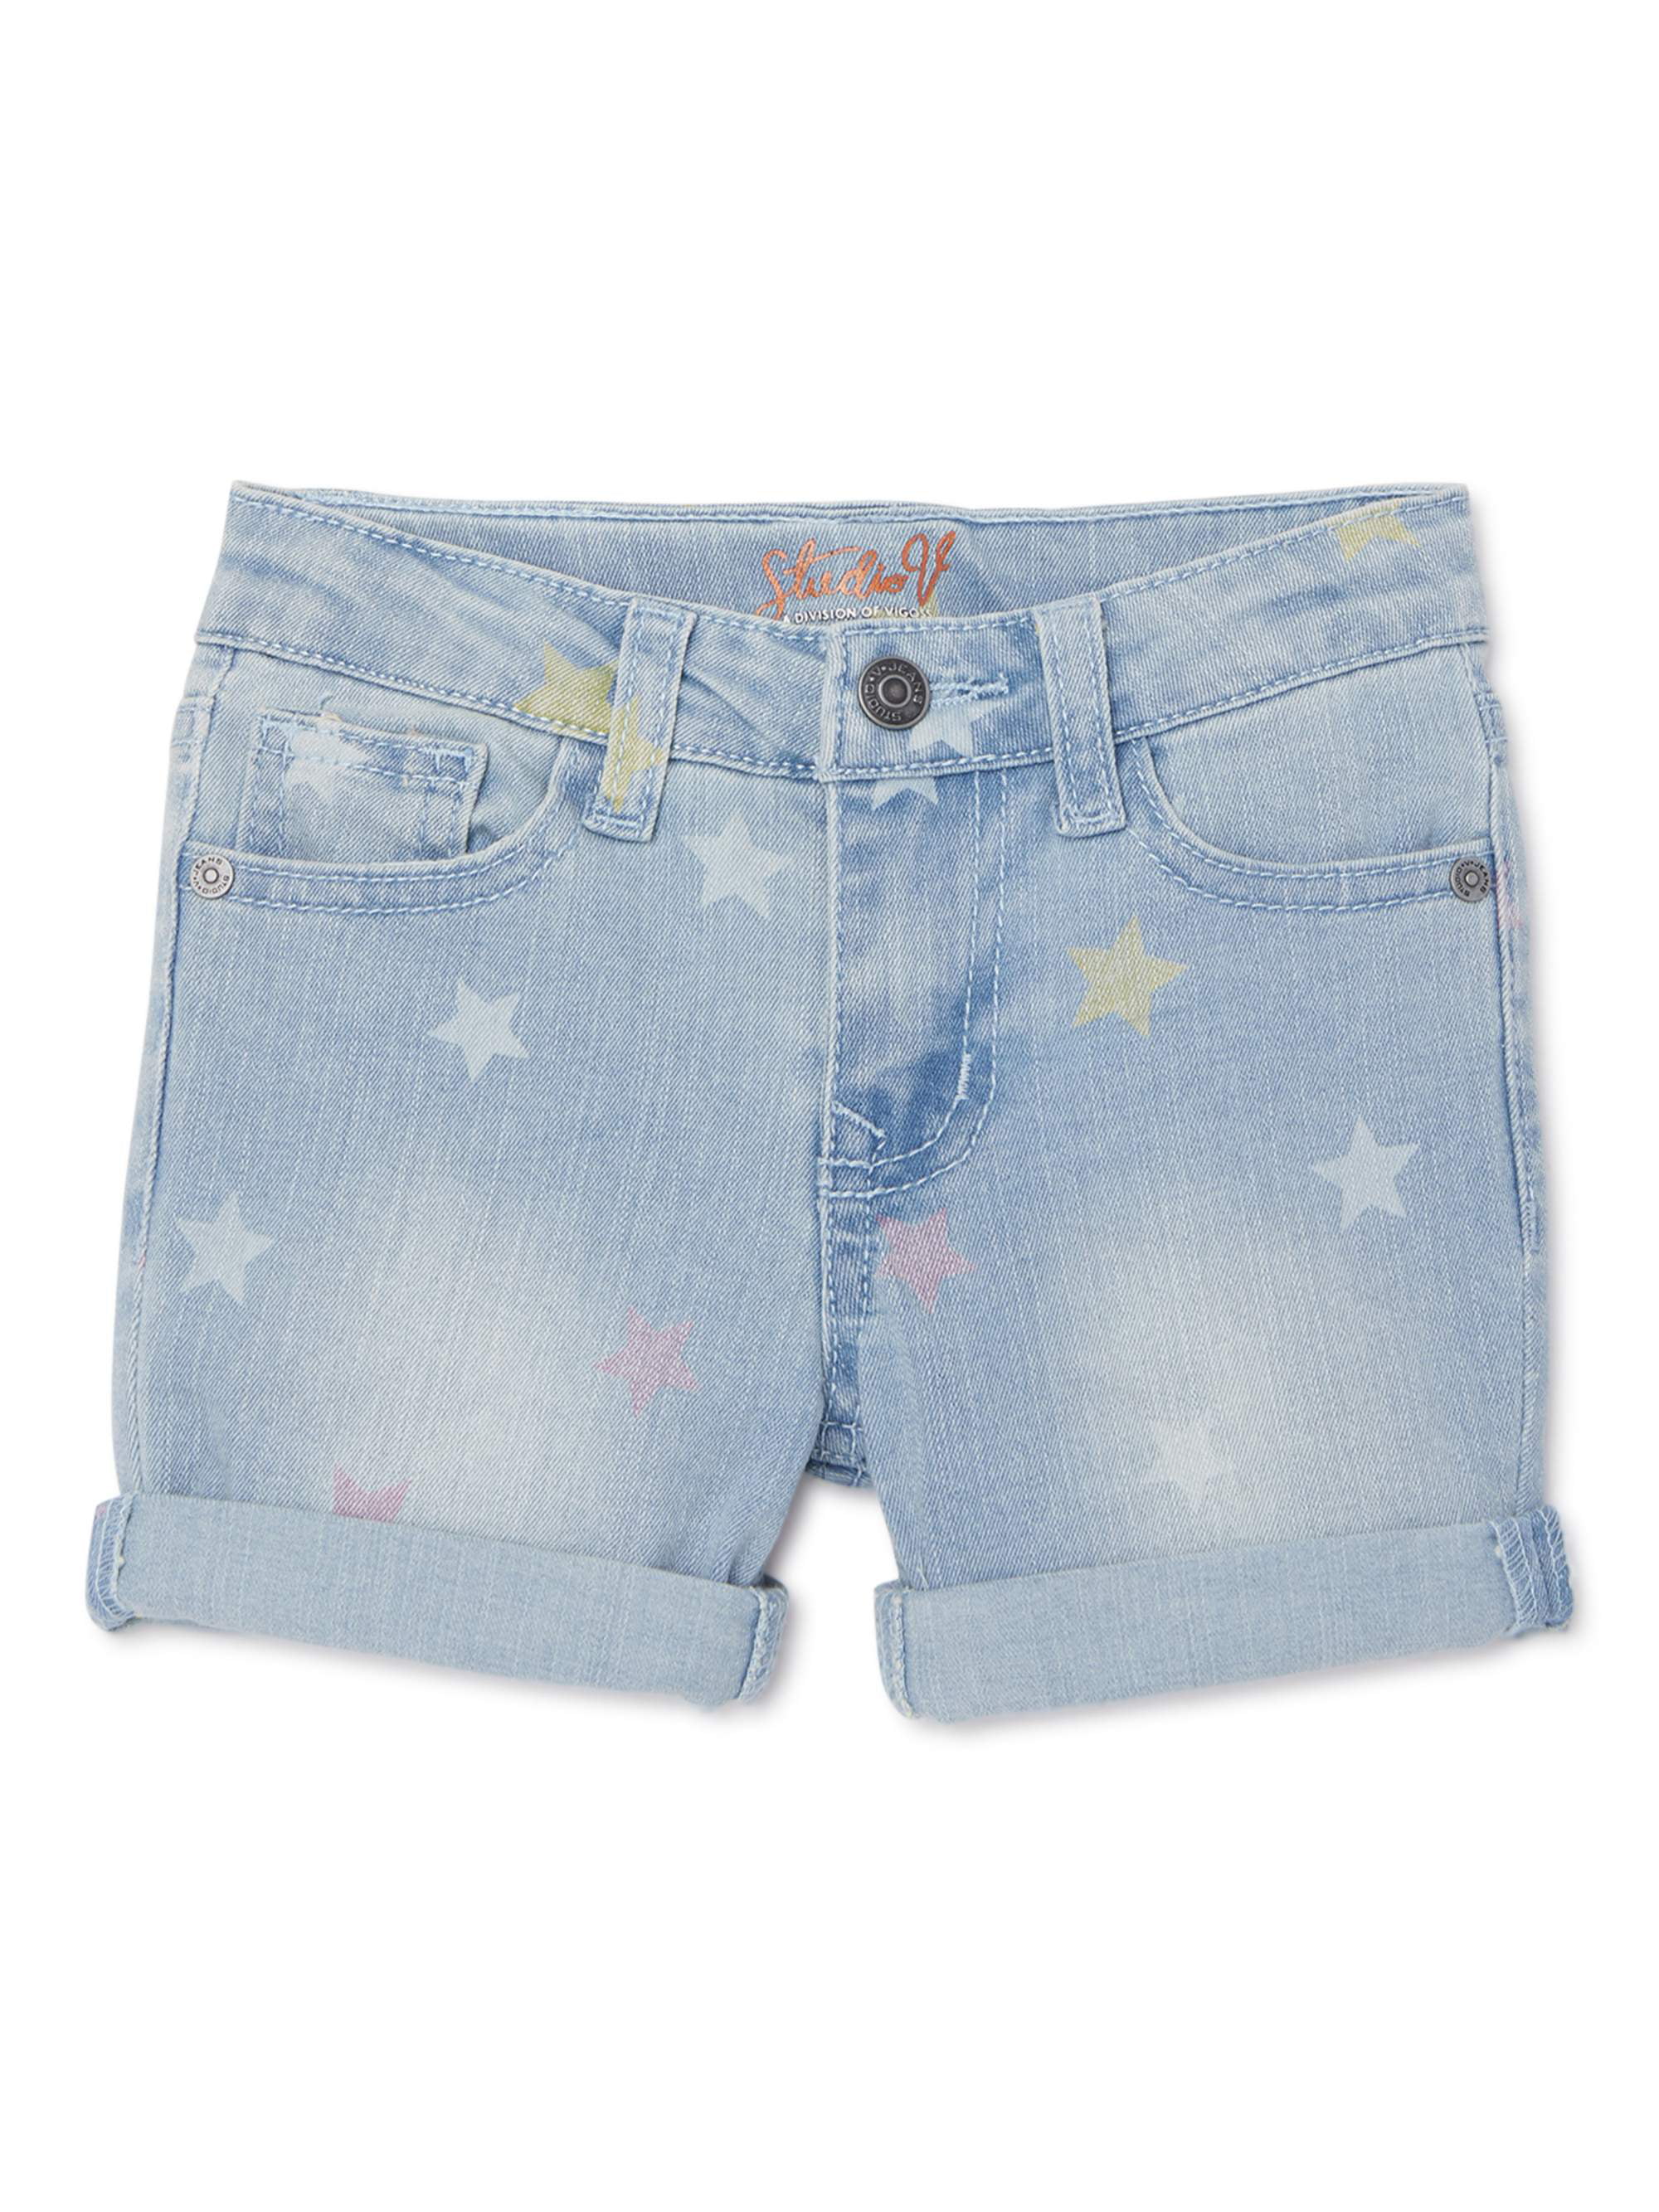 jean shorts with stars on them